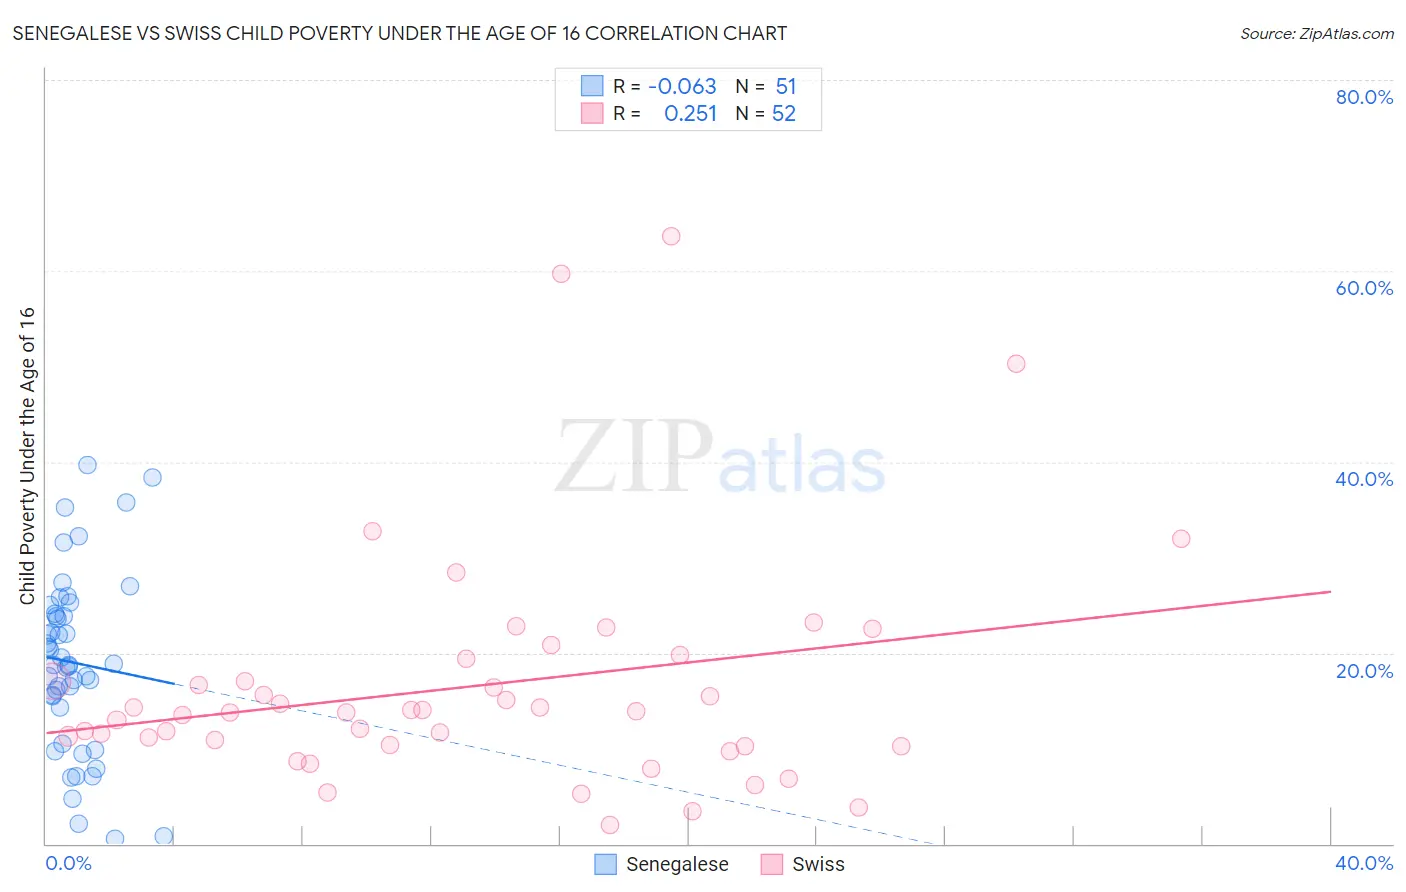 Senegalese vs Swiss Child Poverty Under the Age of 16